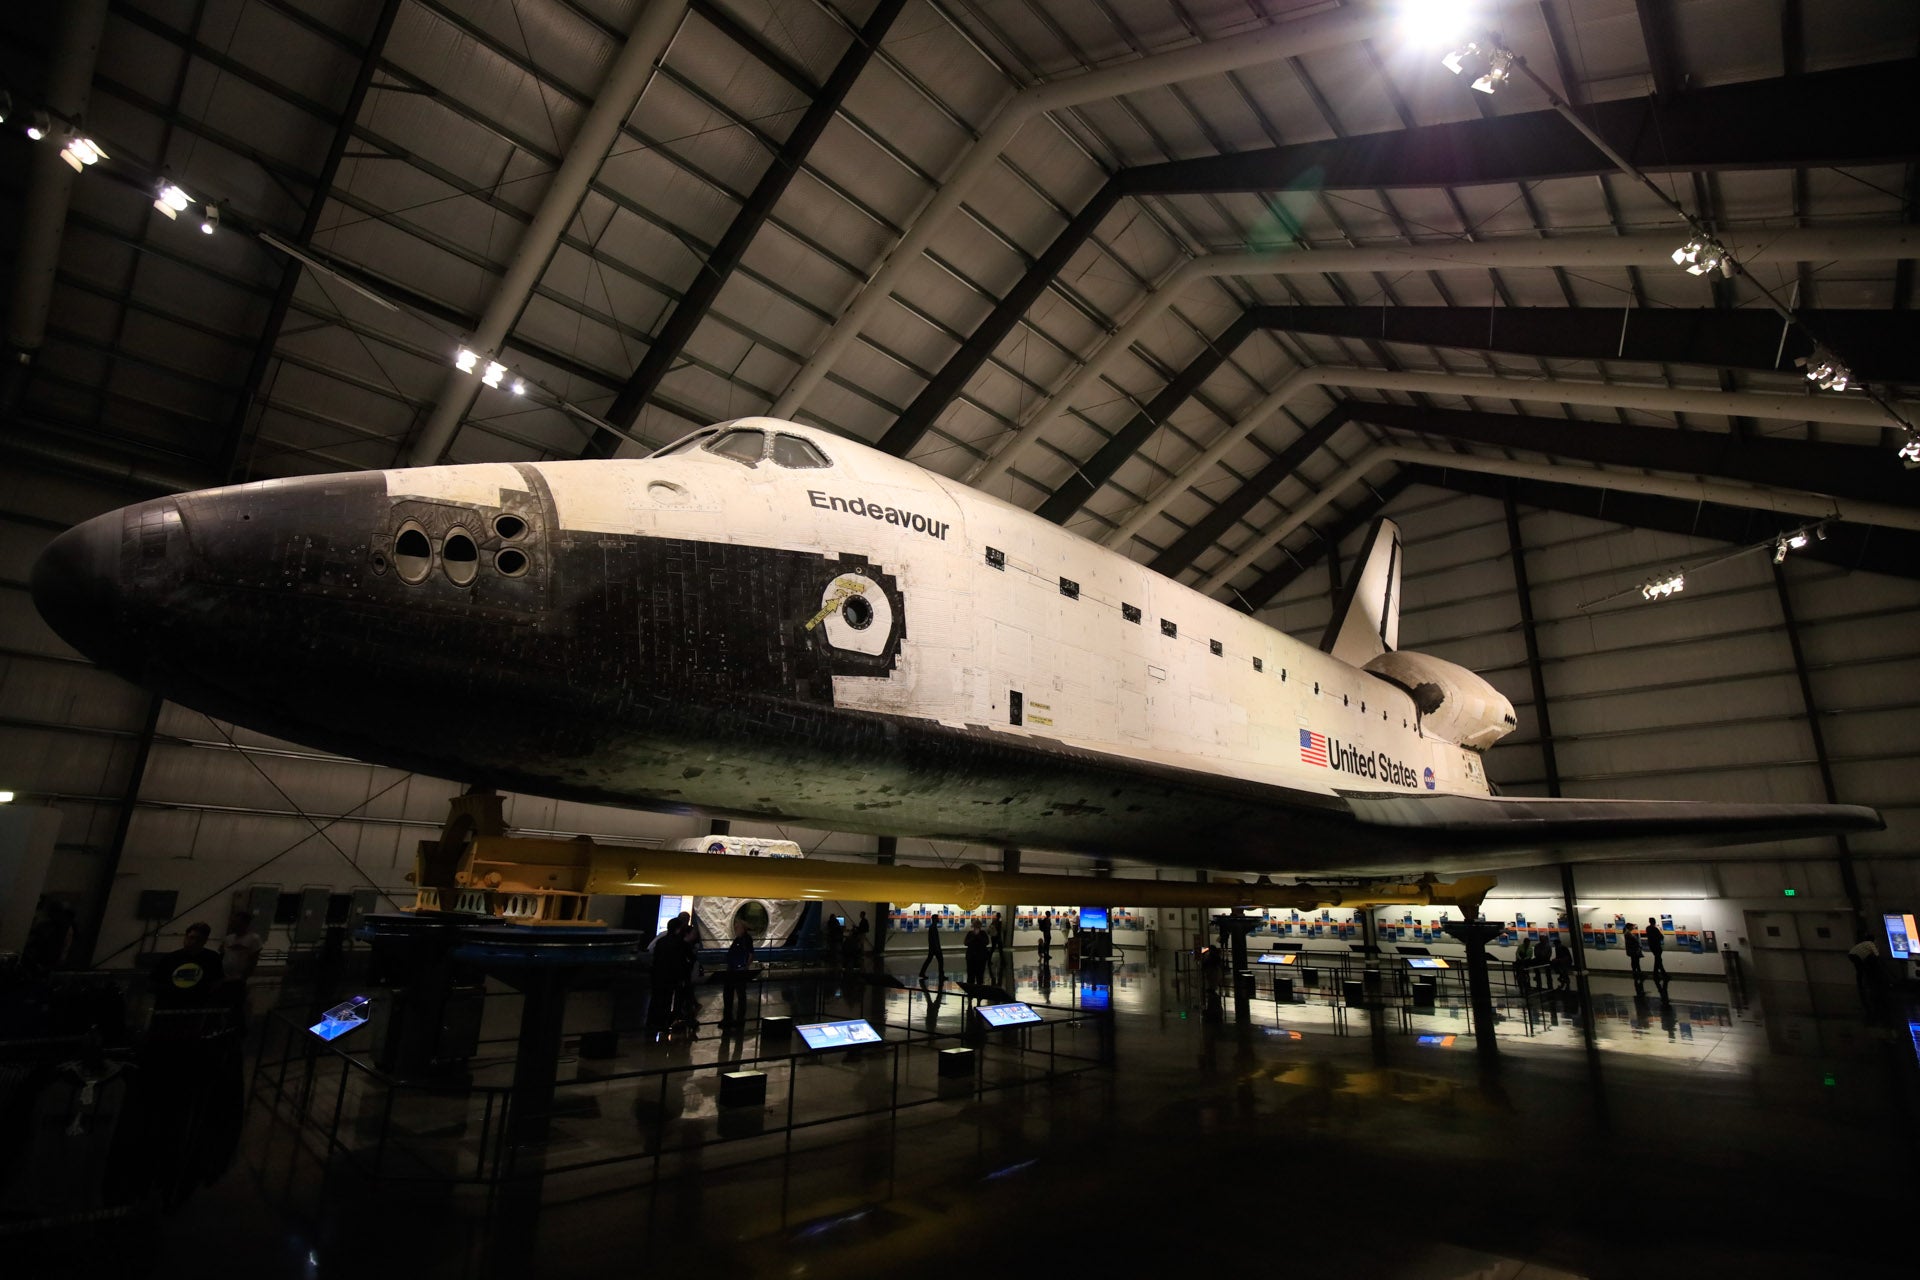 Space Shuttle "Endeavour" at the California Science Center